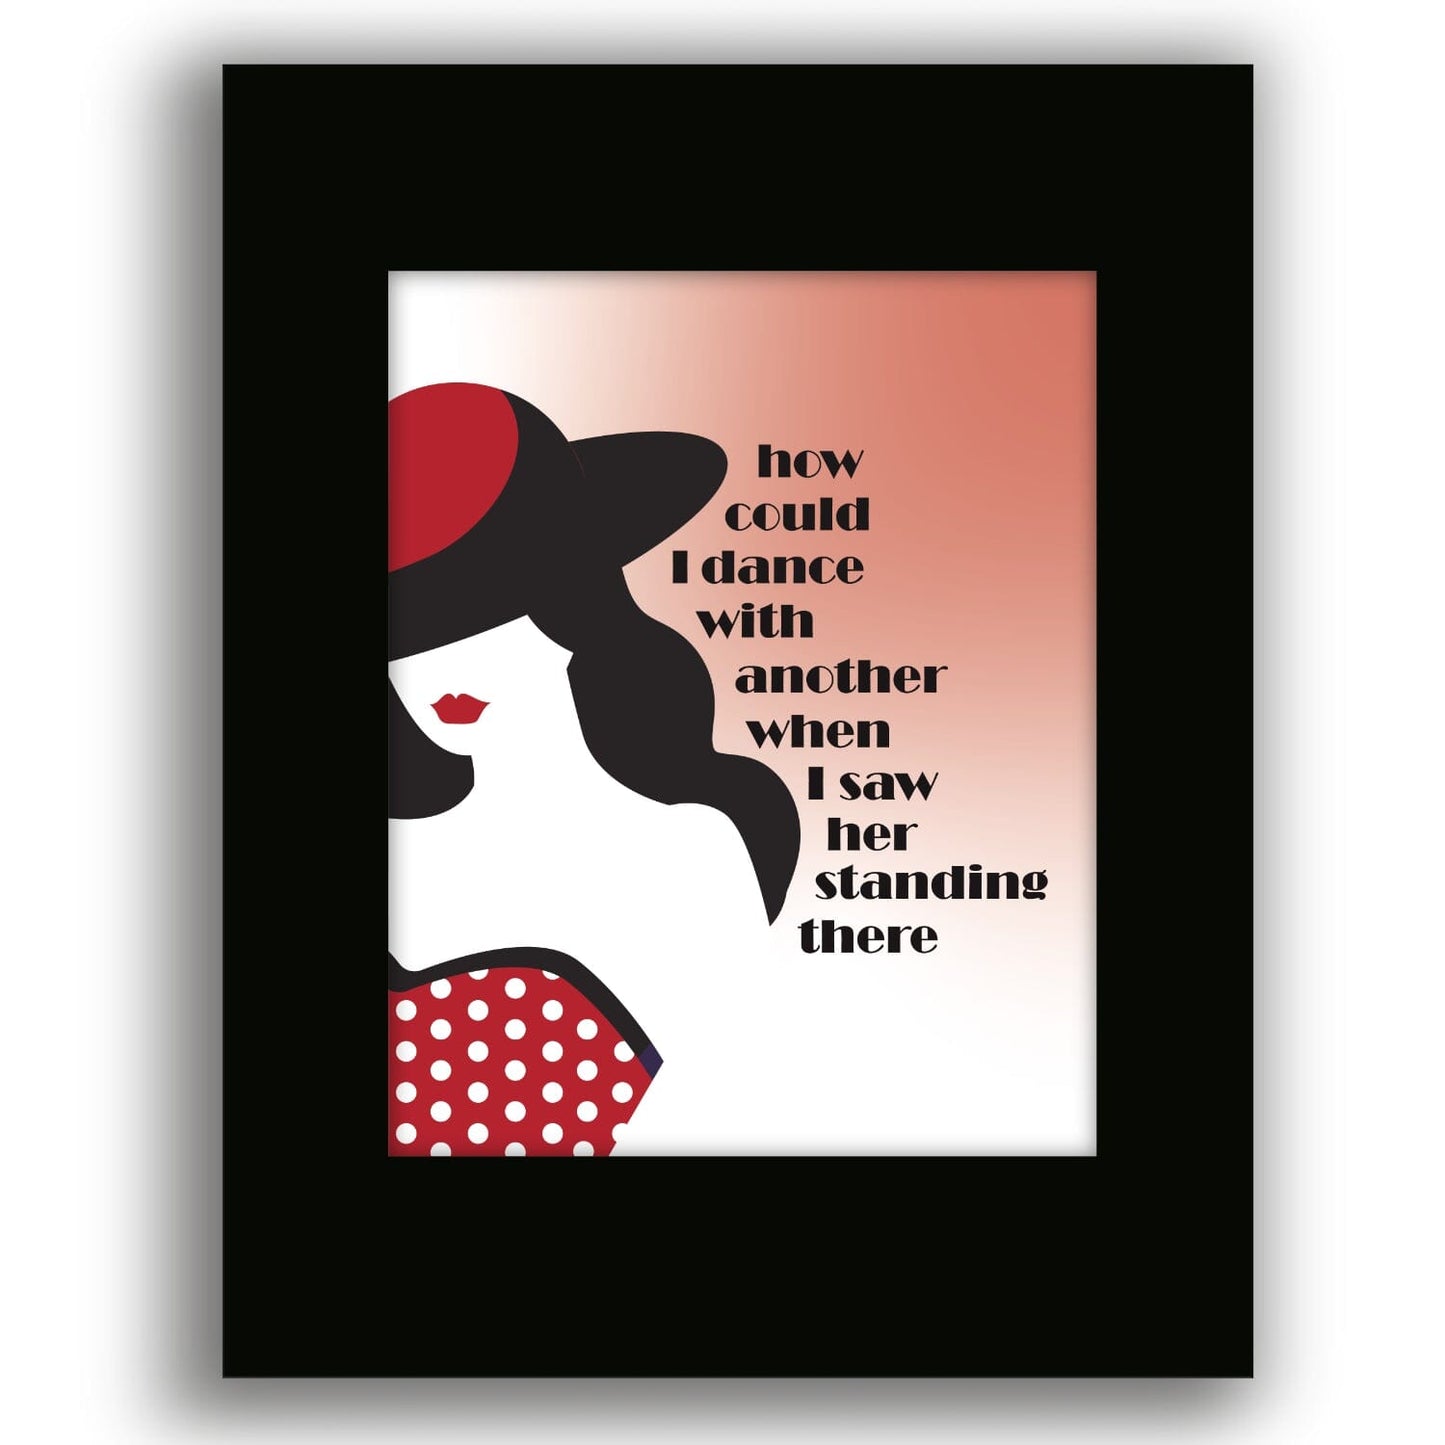 I Saw Her Standing There by the Beatles - Song Lyrics Print Song Lyrics Art Song Lyrics Art 8x10 Black Matted Unframed Print 